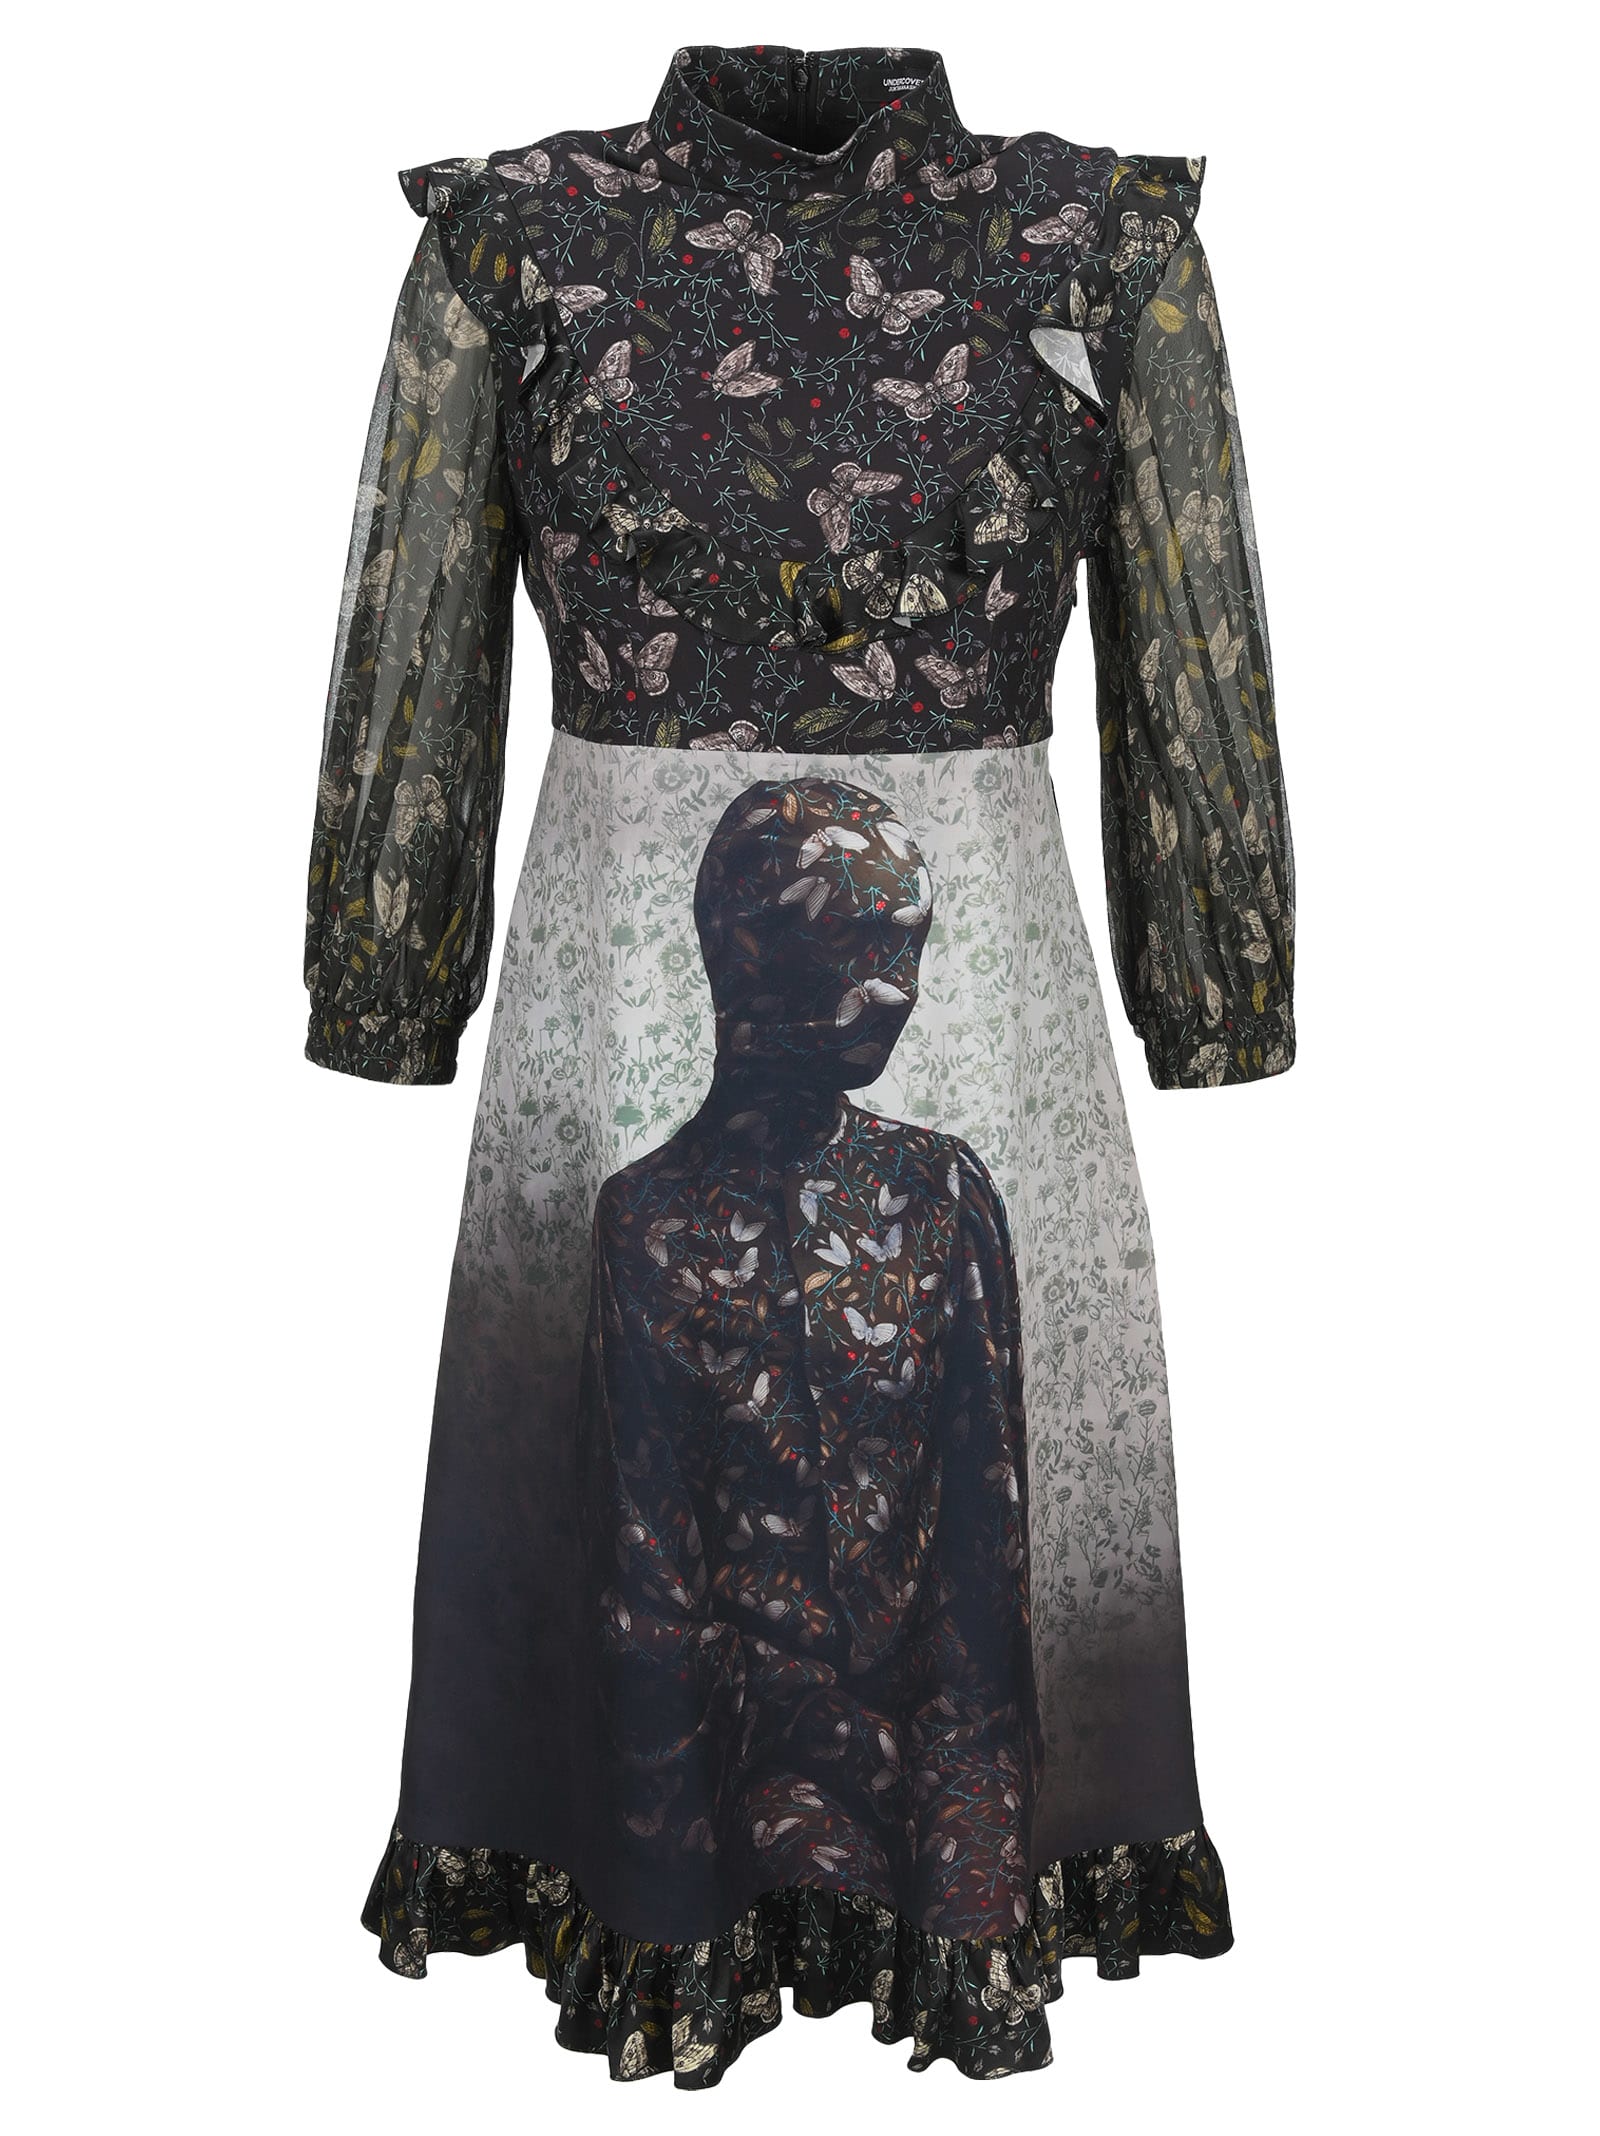 Undercover Jun Takahashi Undercover Frilled Butterfly Print Dress